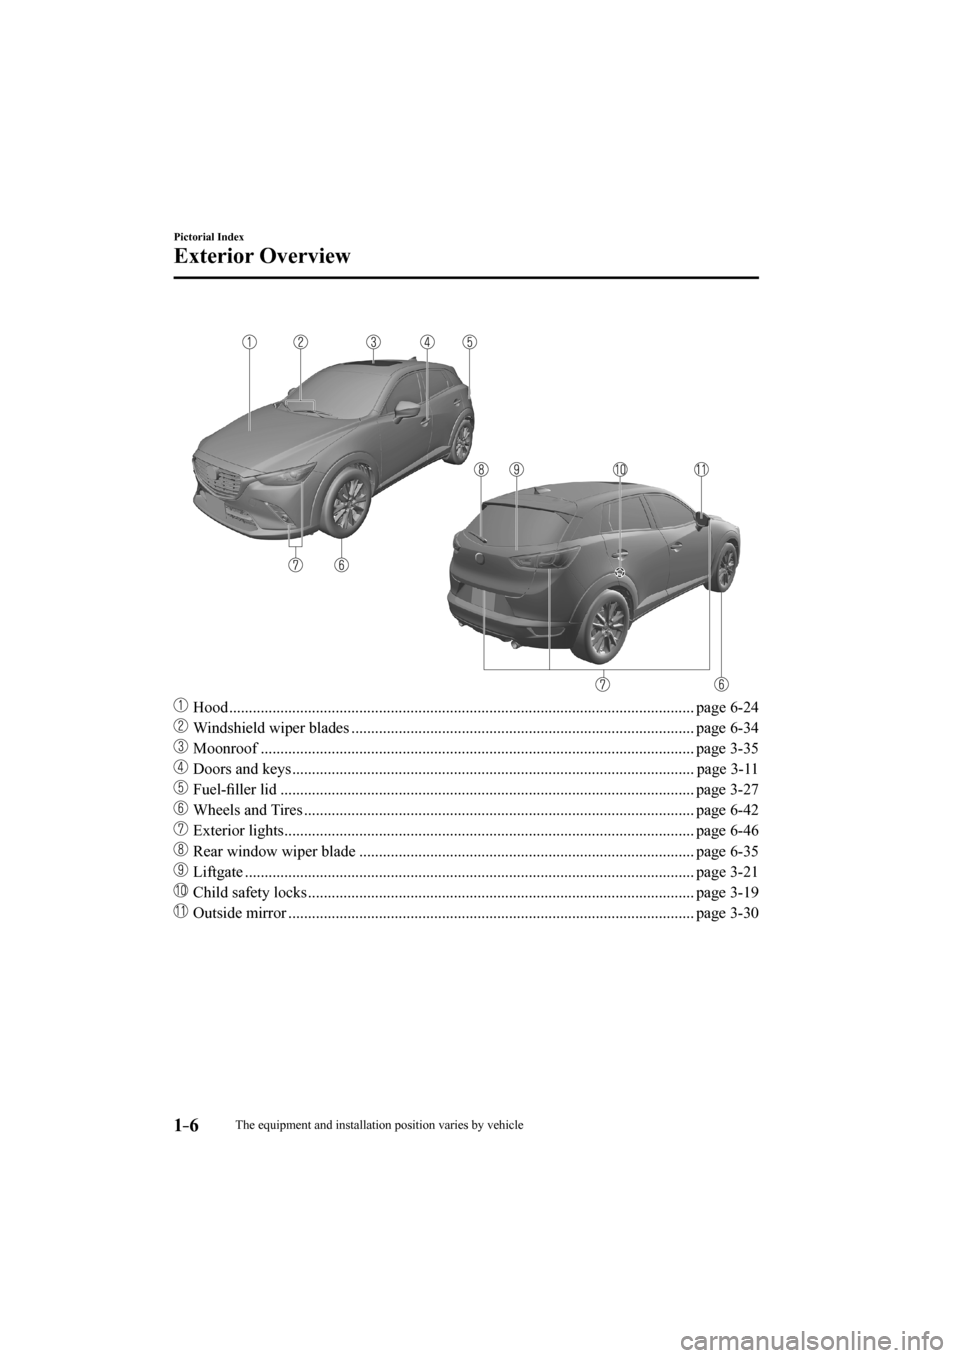 MAZDA MODEL CX-3 2017   (in English) User Guide 1–6
Pictorial Index
Exterior Overview
    
���
 Hood ...................................................................................................................... page  6-24 
��
  Wind